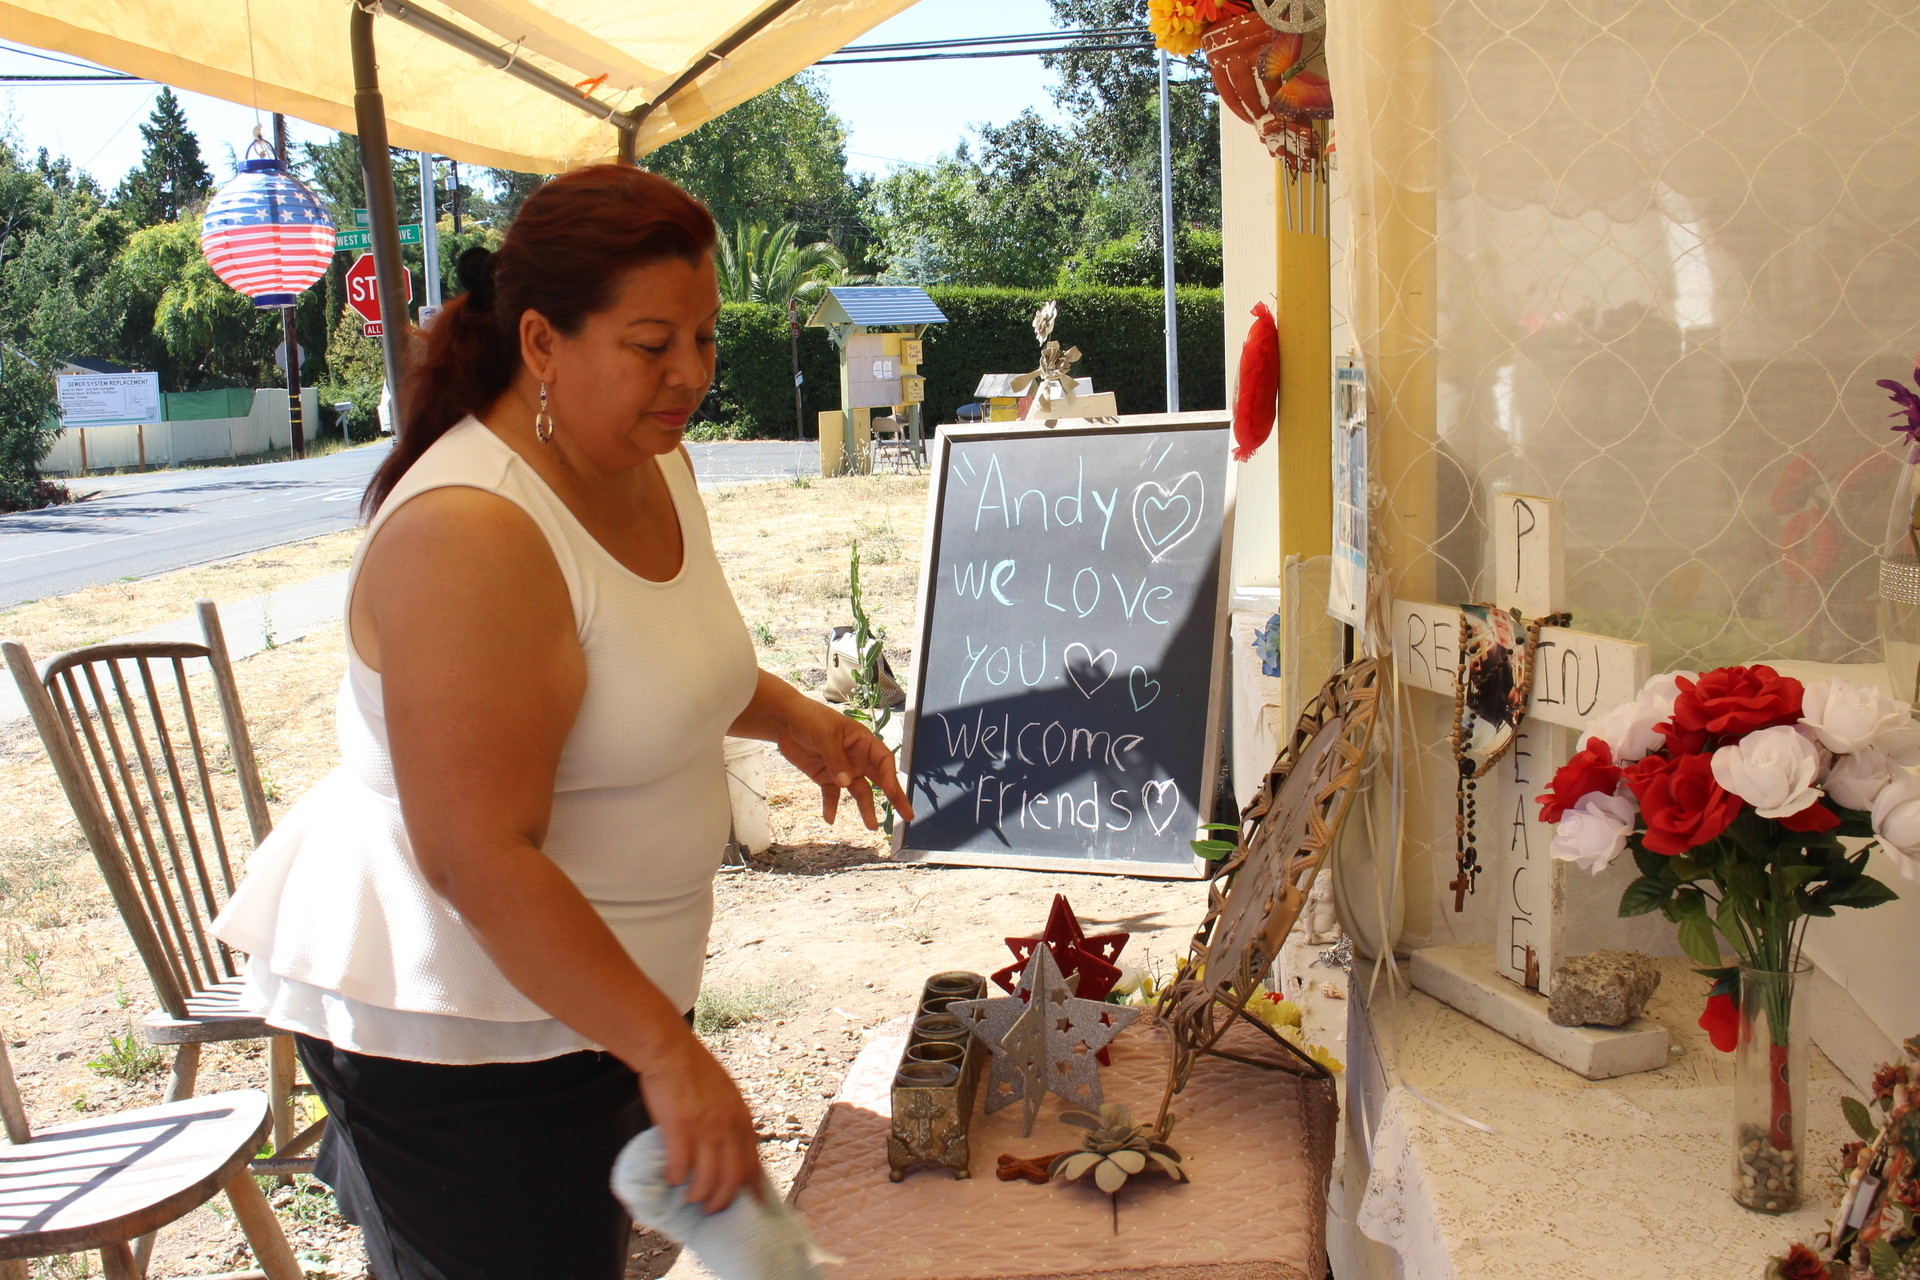 Concepcion Dominguez cleans a memorial for Andy Lopez on July 26, 2016 at the site of his death on a lot he used to play in. Dominguez, a former neighbor of Lopez's, says she would prefer Gelhaus be kept off street patrol. "It's too dangerous" for residents,